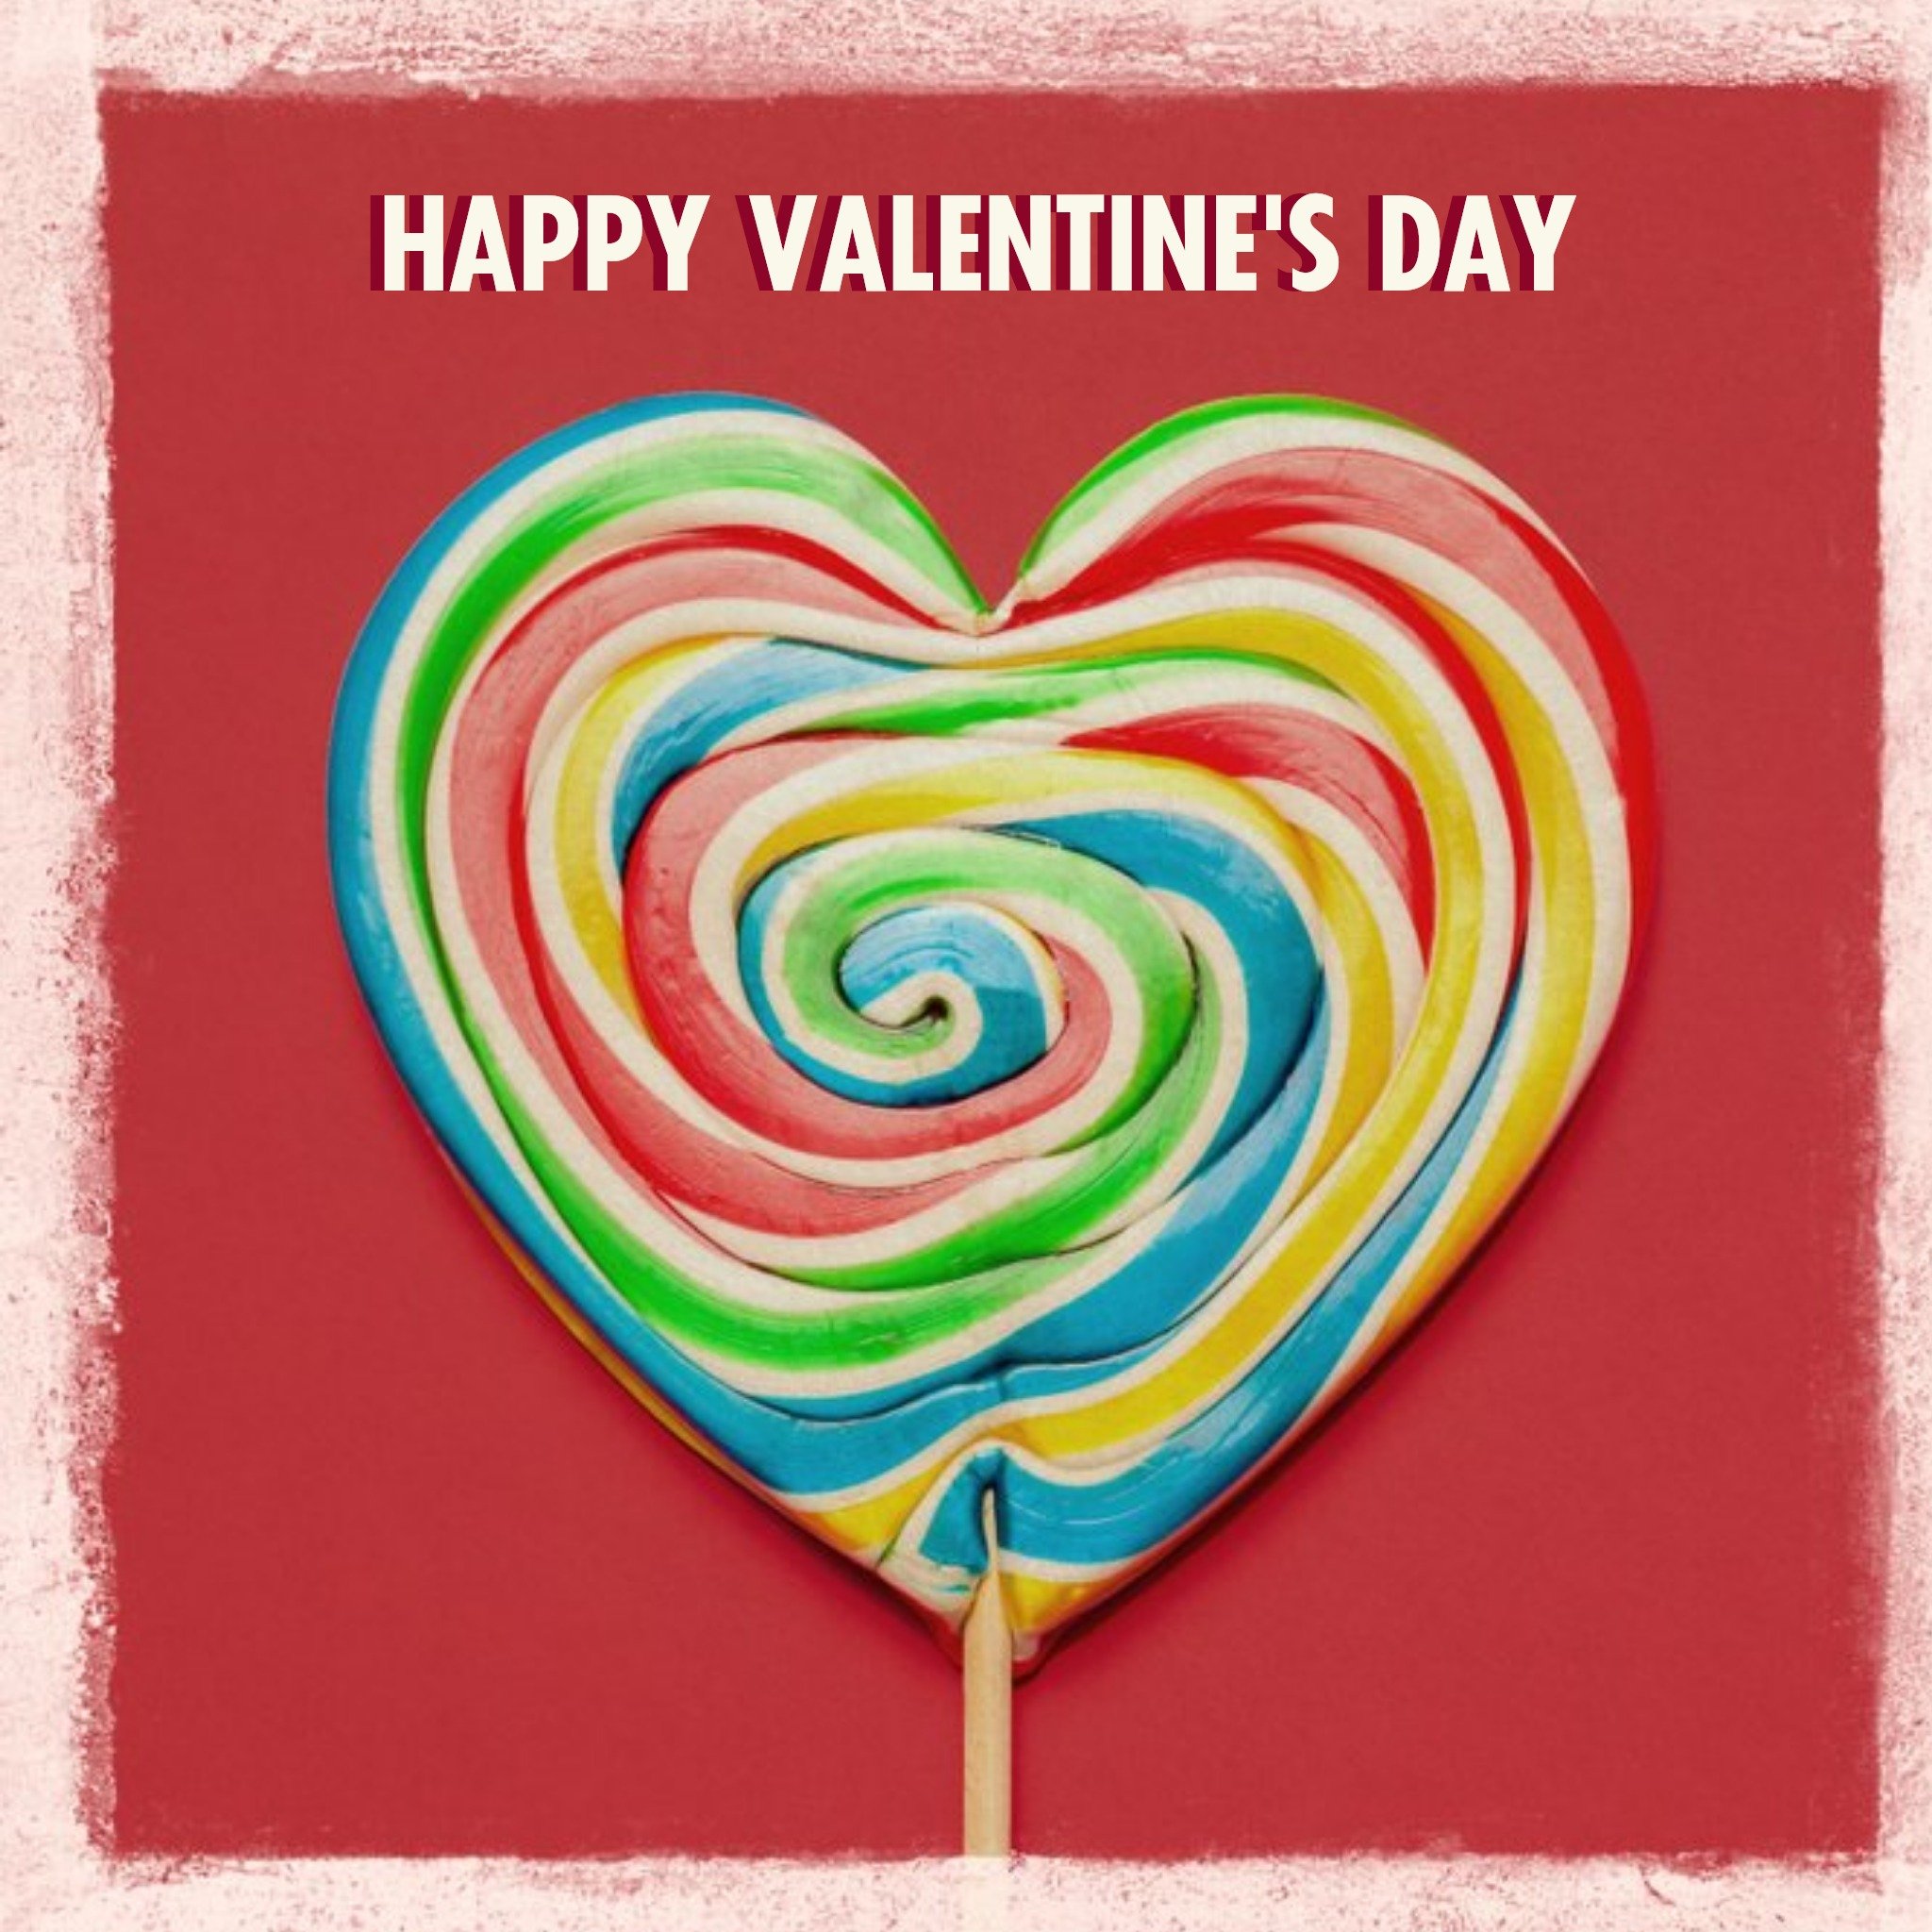 Moonpig Heart Shaped Lollipop Personalised Happy Valentine's Day Card, Square